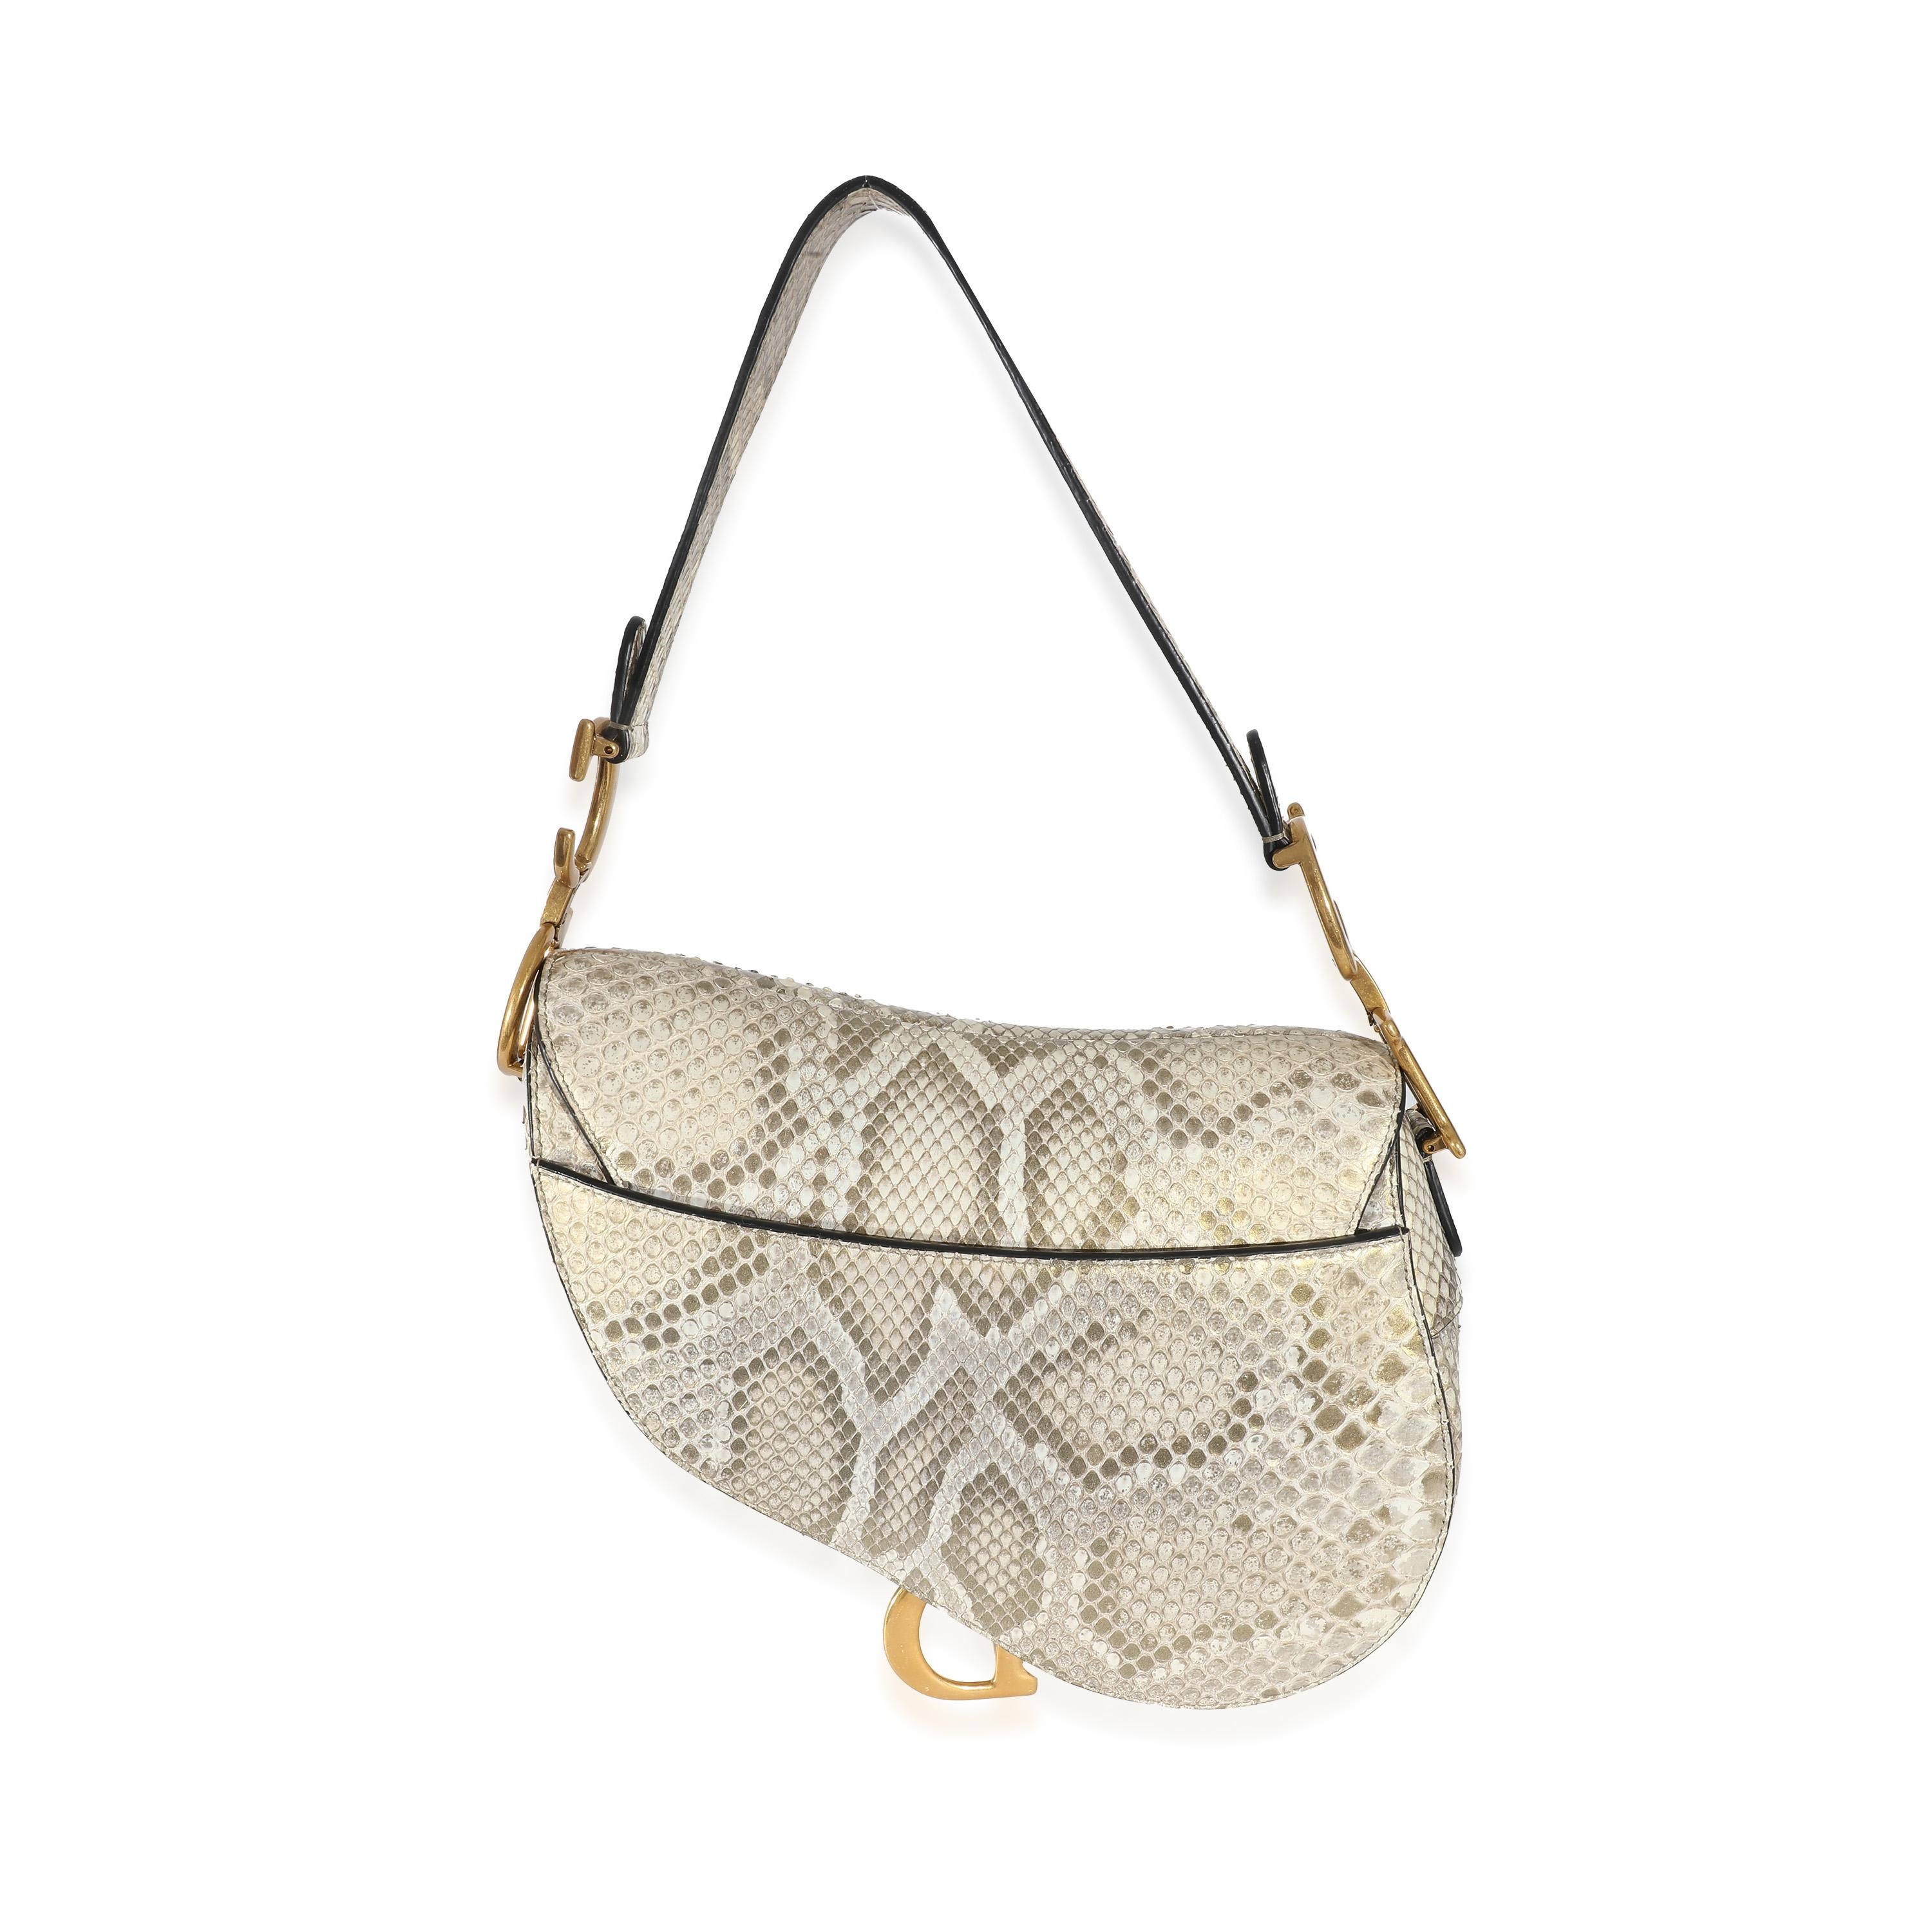 Listing Title: Christian Dior Gold Metallic Python Saddle Bag
SKU: 134013
Condition: Pre-owned 
Handbag Condition: Very Good
Condition Comments: Item is in very good condition with minor signs of wear. Exterior scuffing throughout lining. Scratching